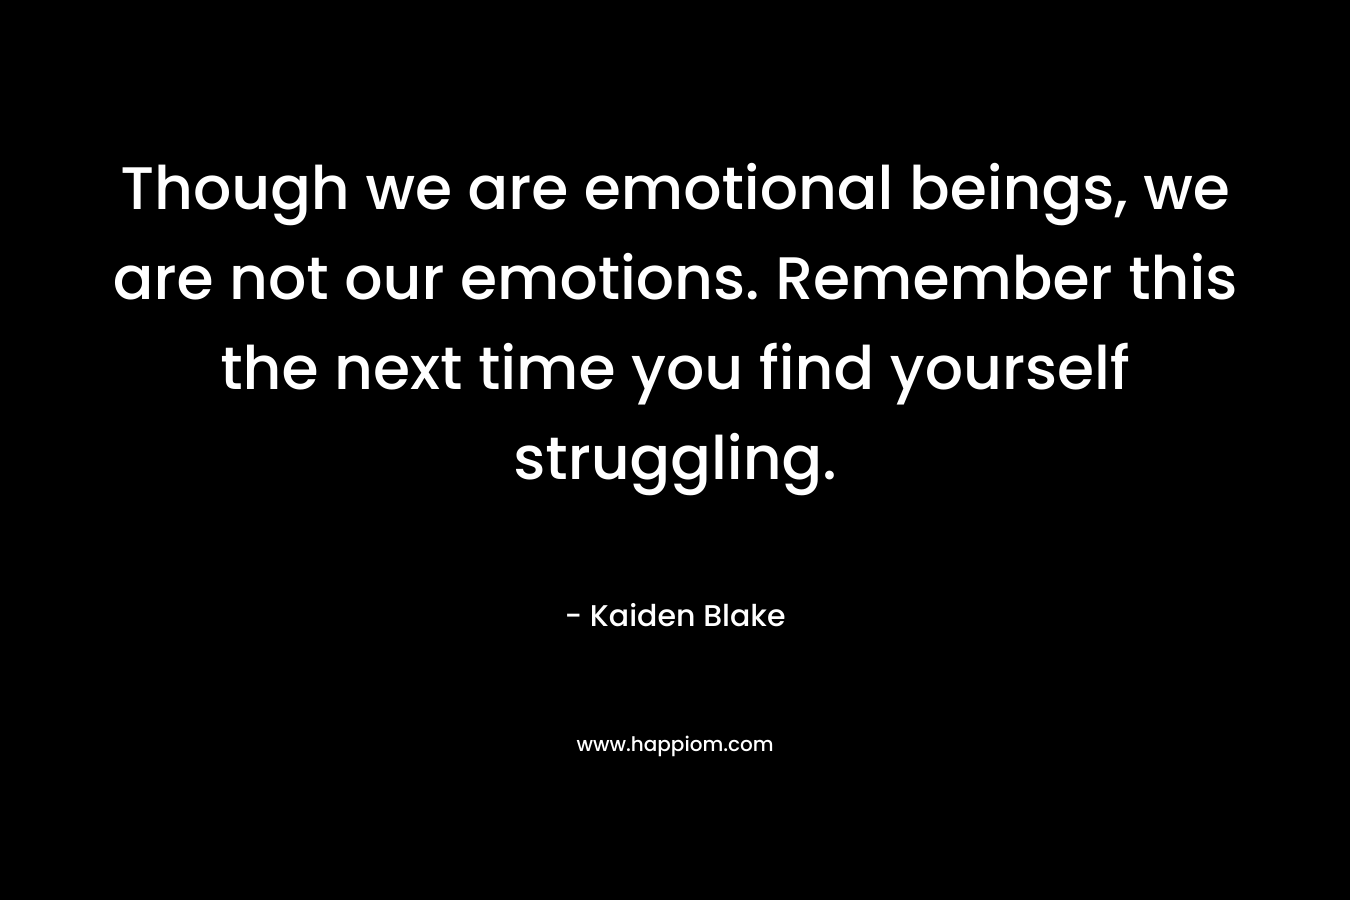 Though we are emotional beings, we are not our emotions. Remember this the next time you find yourself struggling. – Kaiden Blake